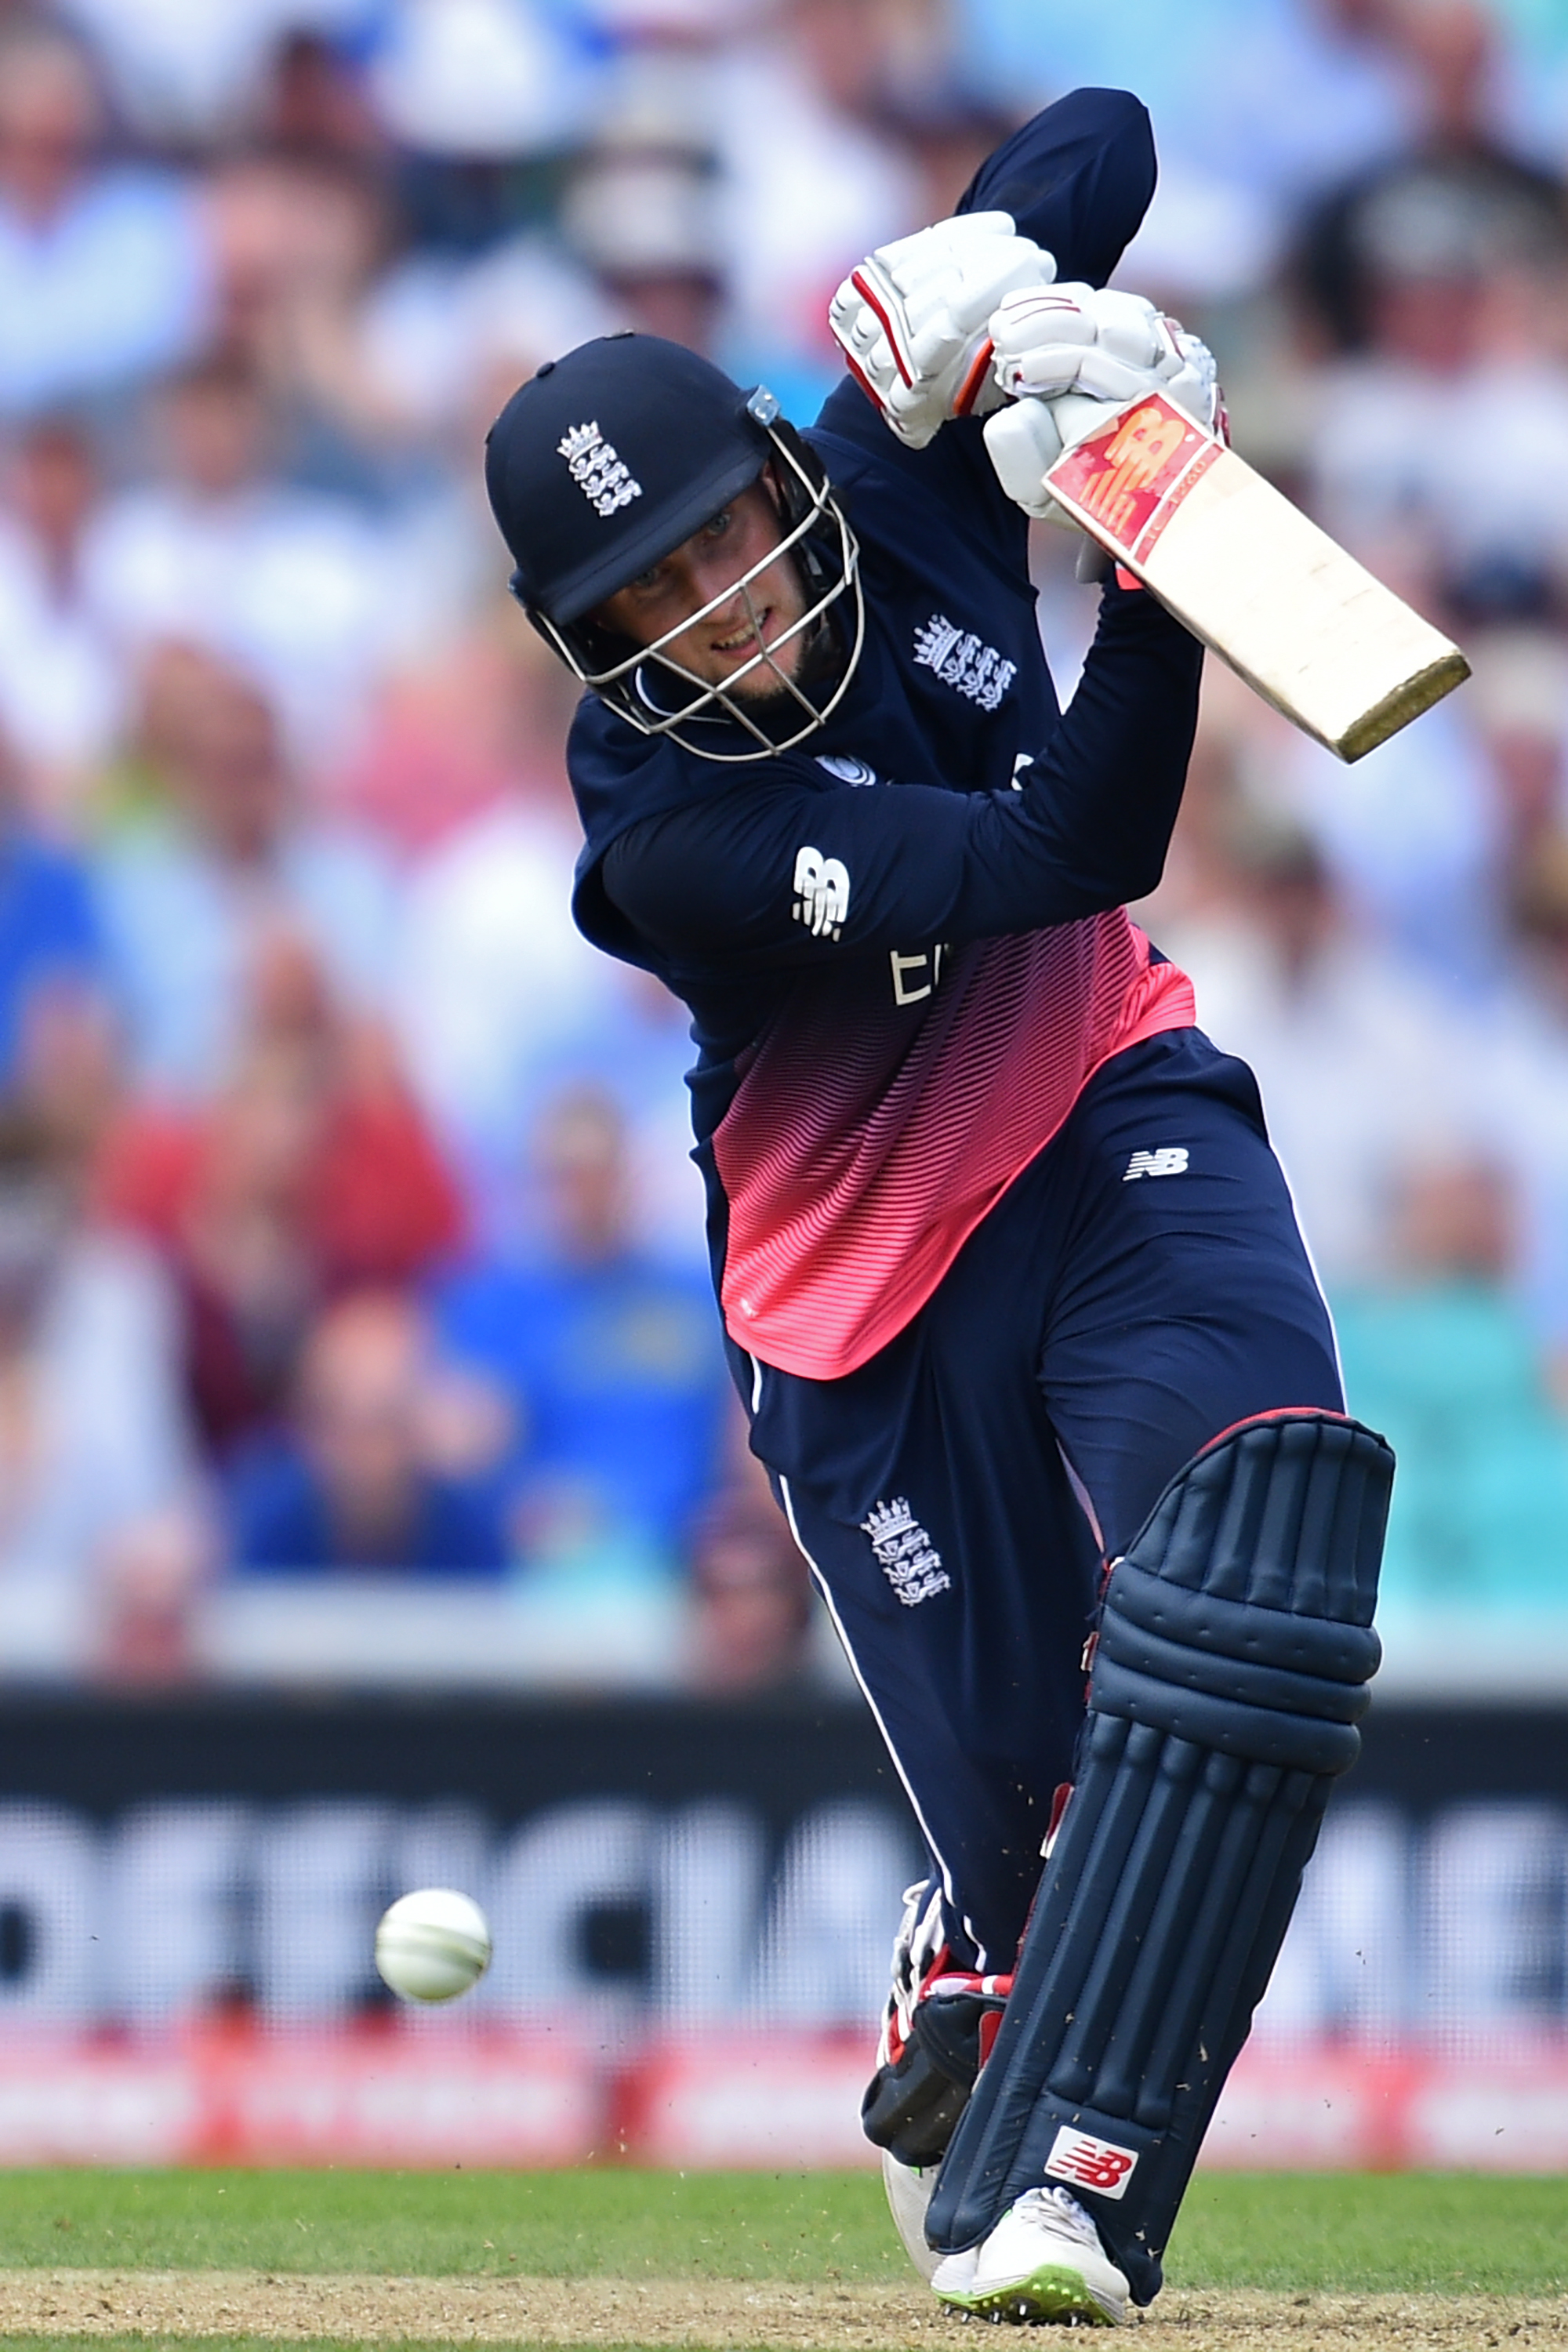 England's Joe Root plays a shot during the ICC Champions trophy cricket match between England and Bangladesh at The Oval in London on June 1, 2017. / AFP PHOTO / Glyn KIRK / RESTRICTED TO EDITORIAL USE (Photo credit should read GLYN KIRK/AFP/Getty Images)